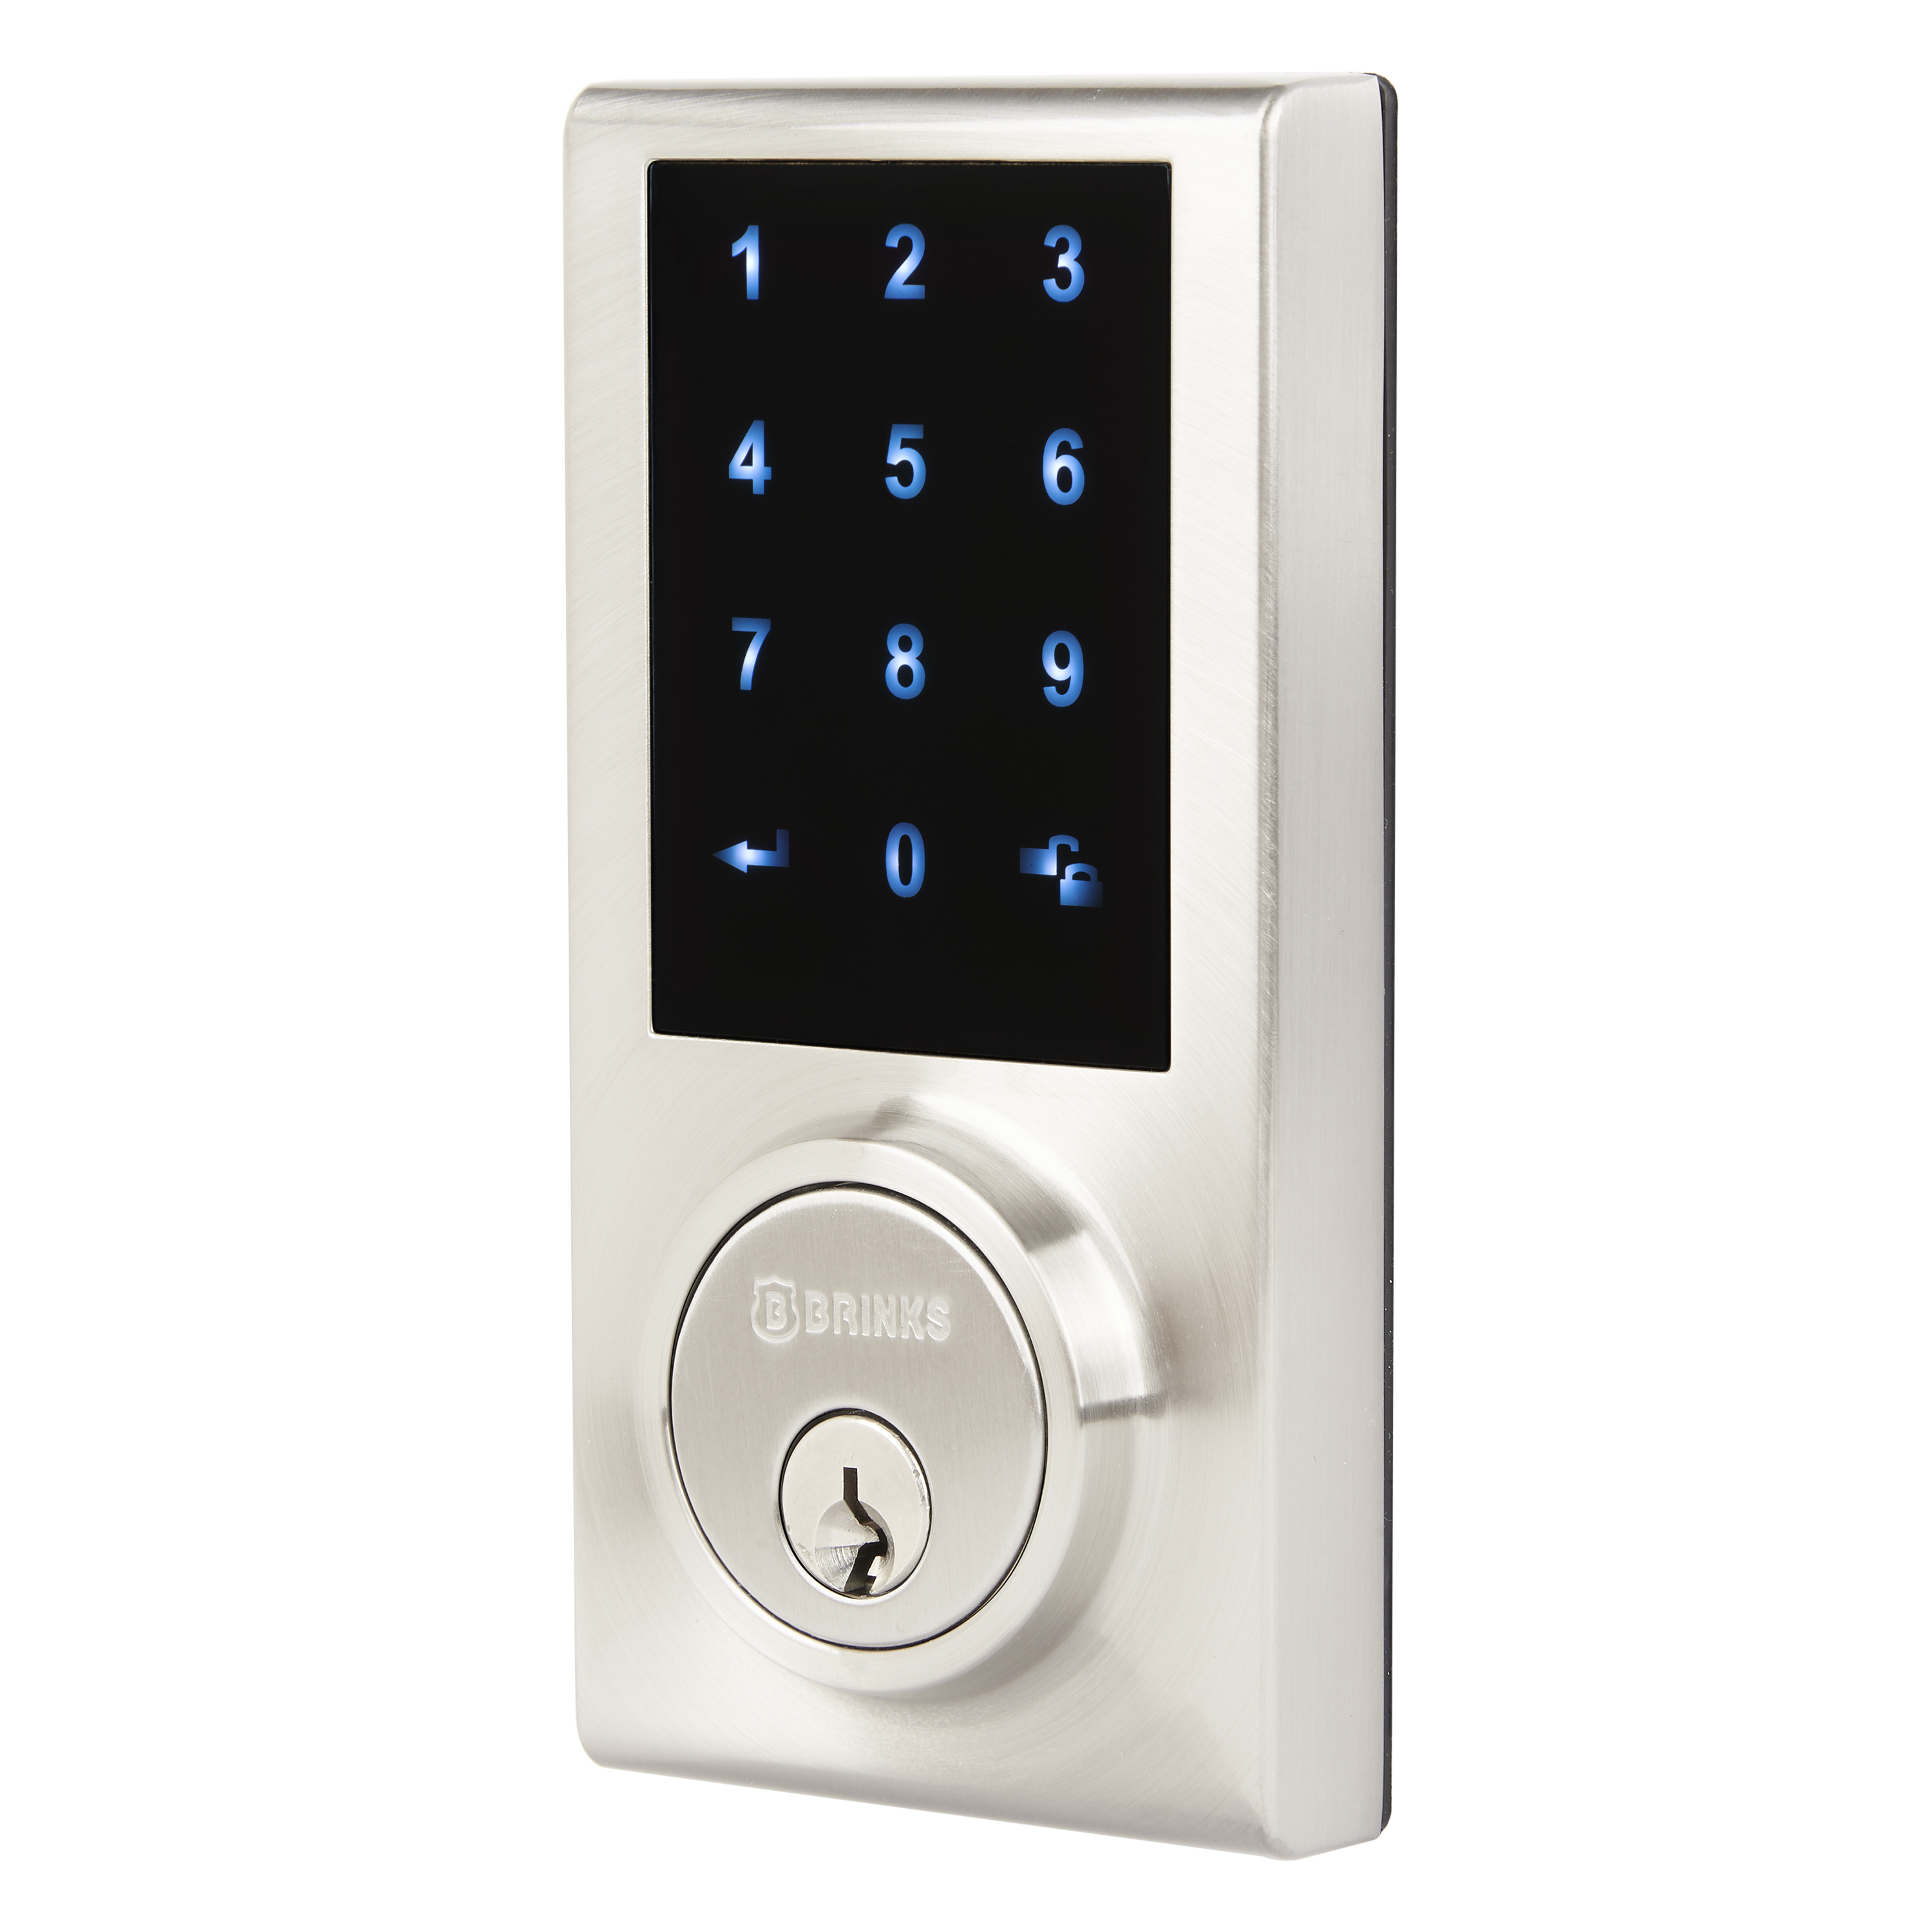 Brinks, Keyed Entry Satin Nickel Electronic Touchscreen Deadbolt - image 4 of 16